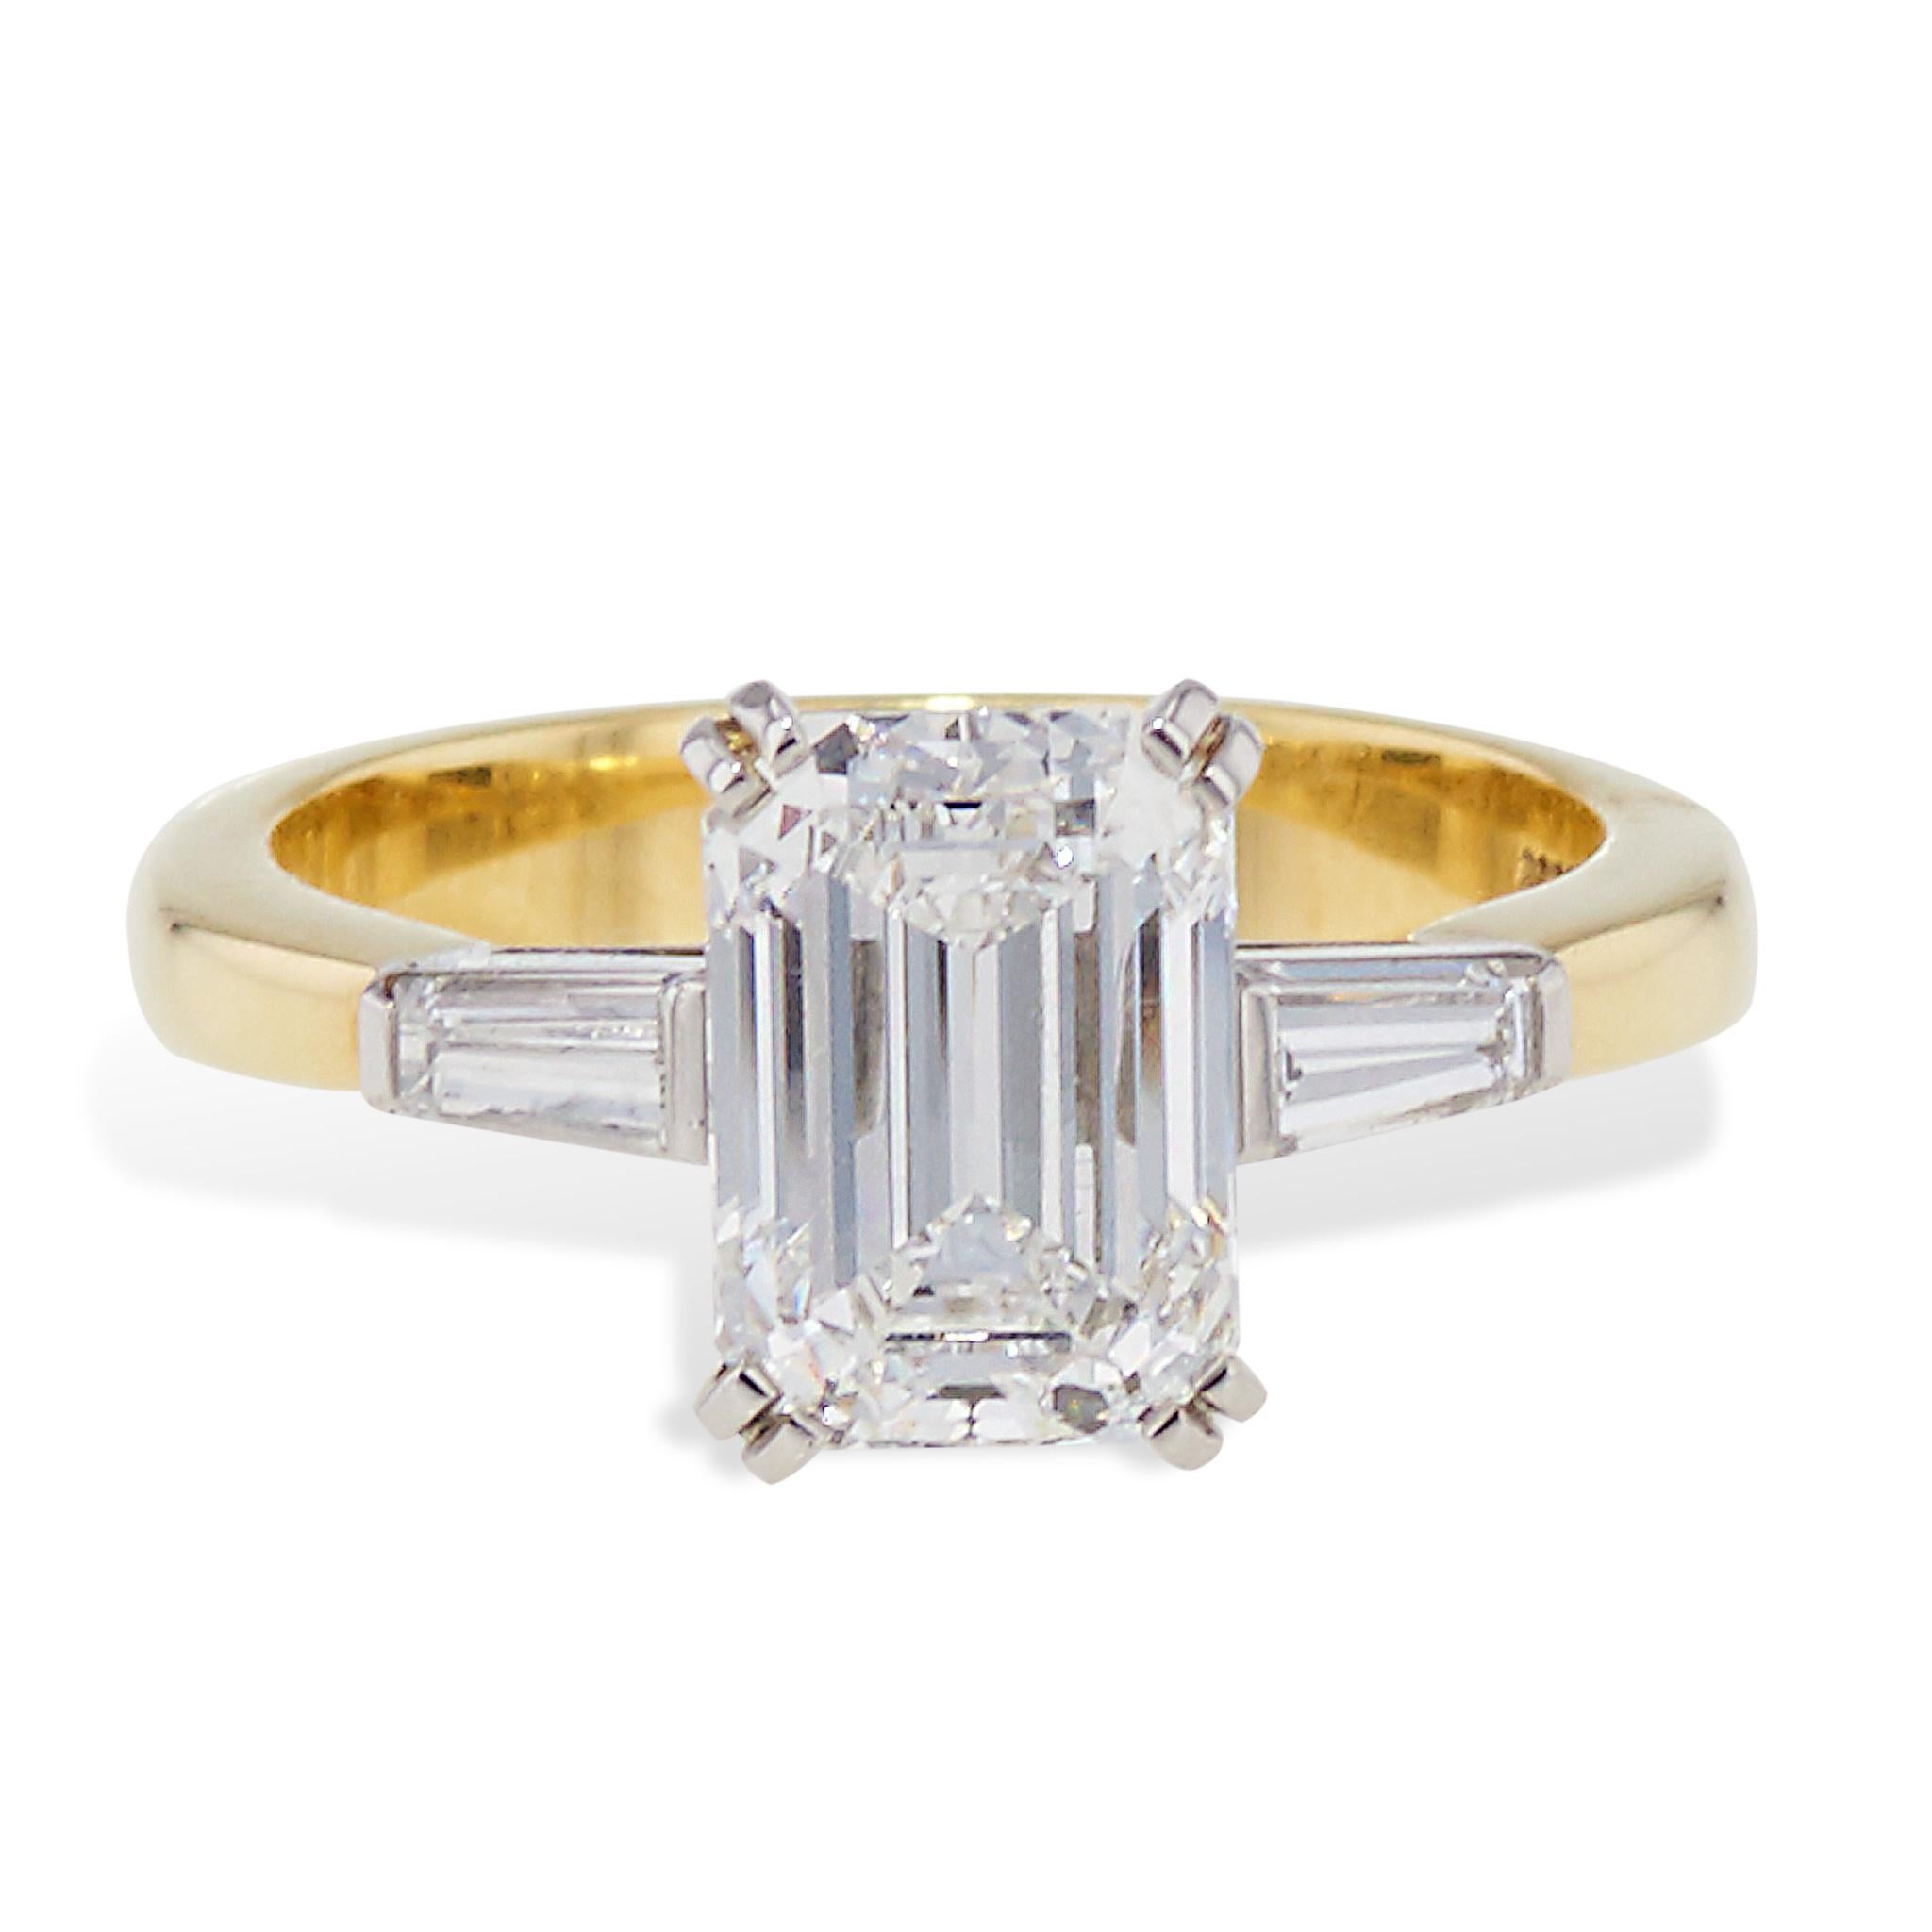 A timeless classic with an exquisite design, this Tiffany & Co. Circa 1990 Yellow Gold and Platinum Emerald Cut Diamond Ring is truly a sight to behold. 

Crafted in 18 karat yellow gold and platinum, the centerpiece is a stunning 2.52ct F-VVS2